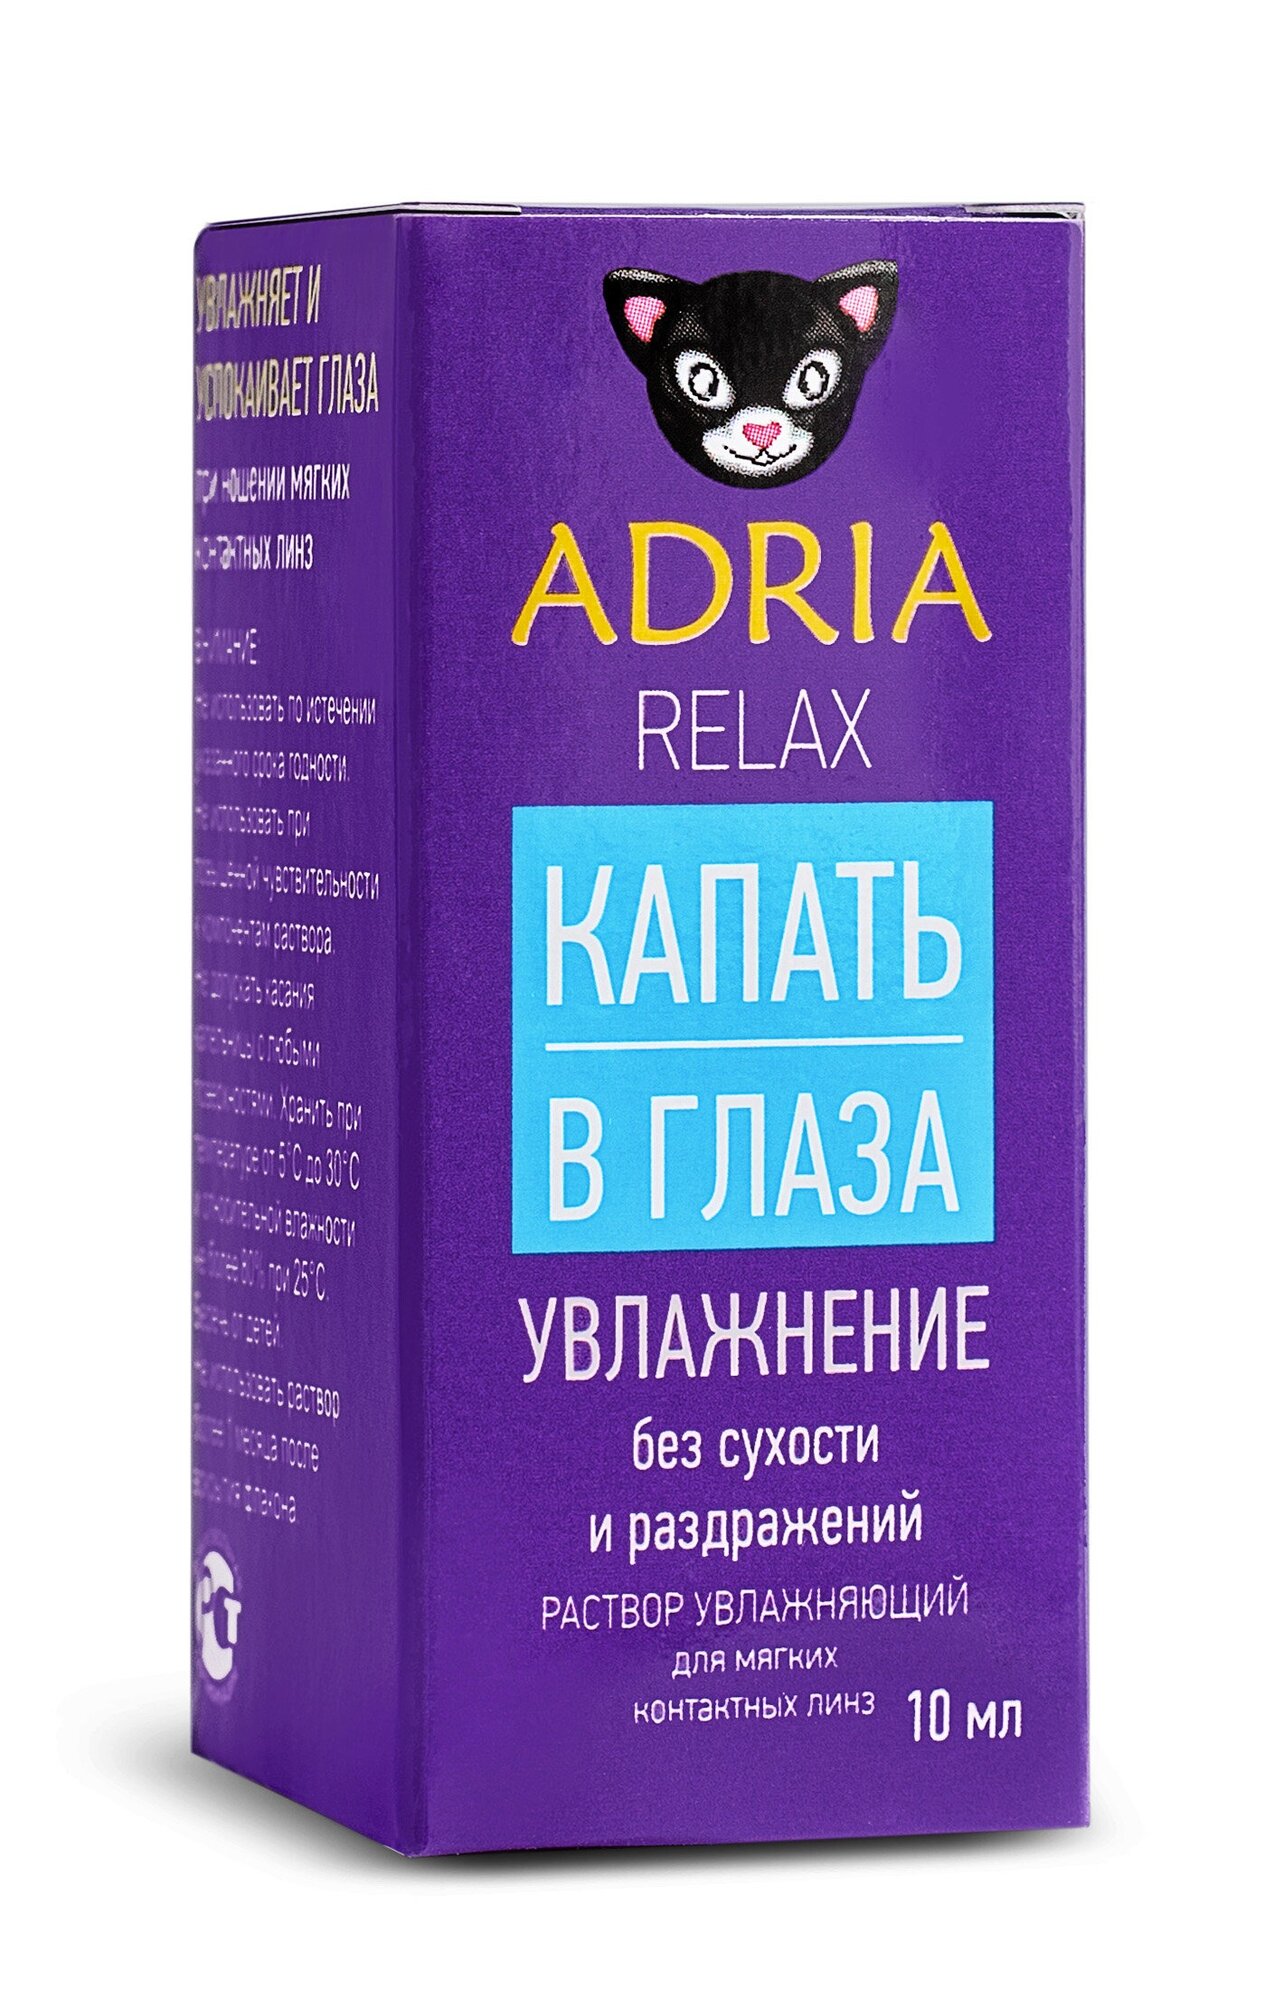 Adria Relax гл. капли фл.-капельница, 10 мл, 10 мл, 35 г, 1 шт.